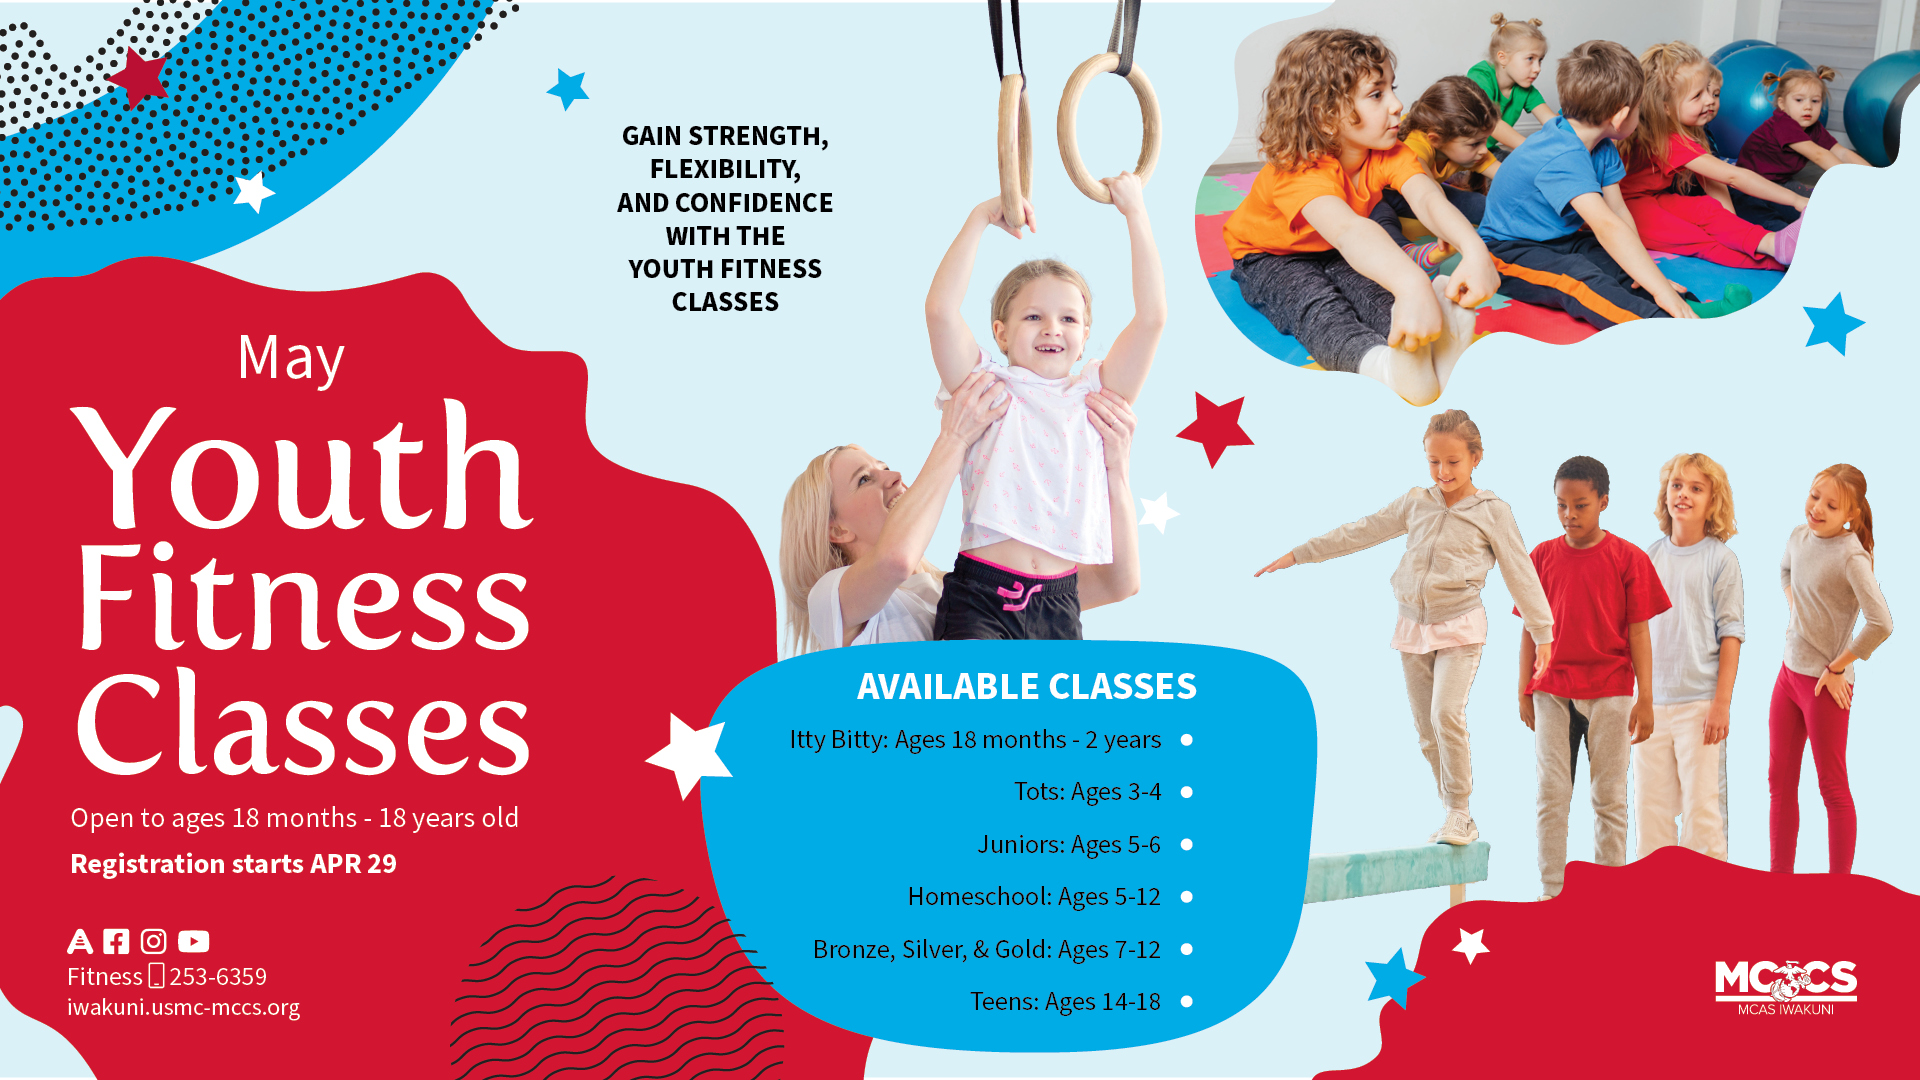 Youth Fitness Classes - May